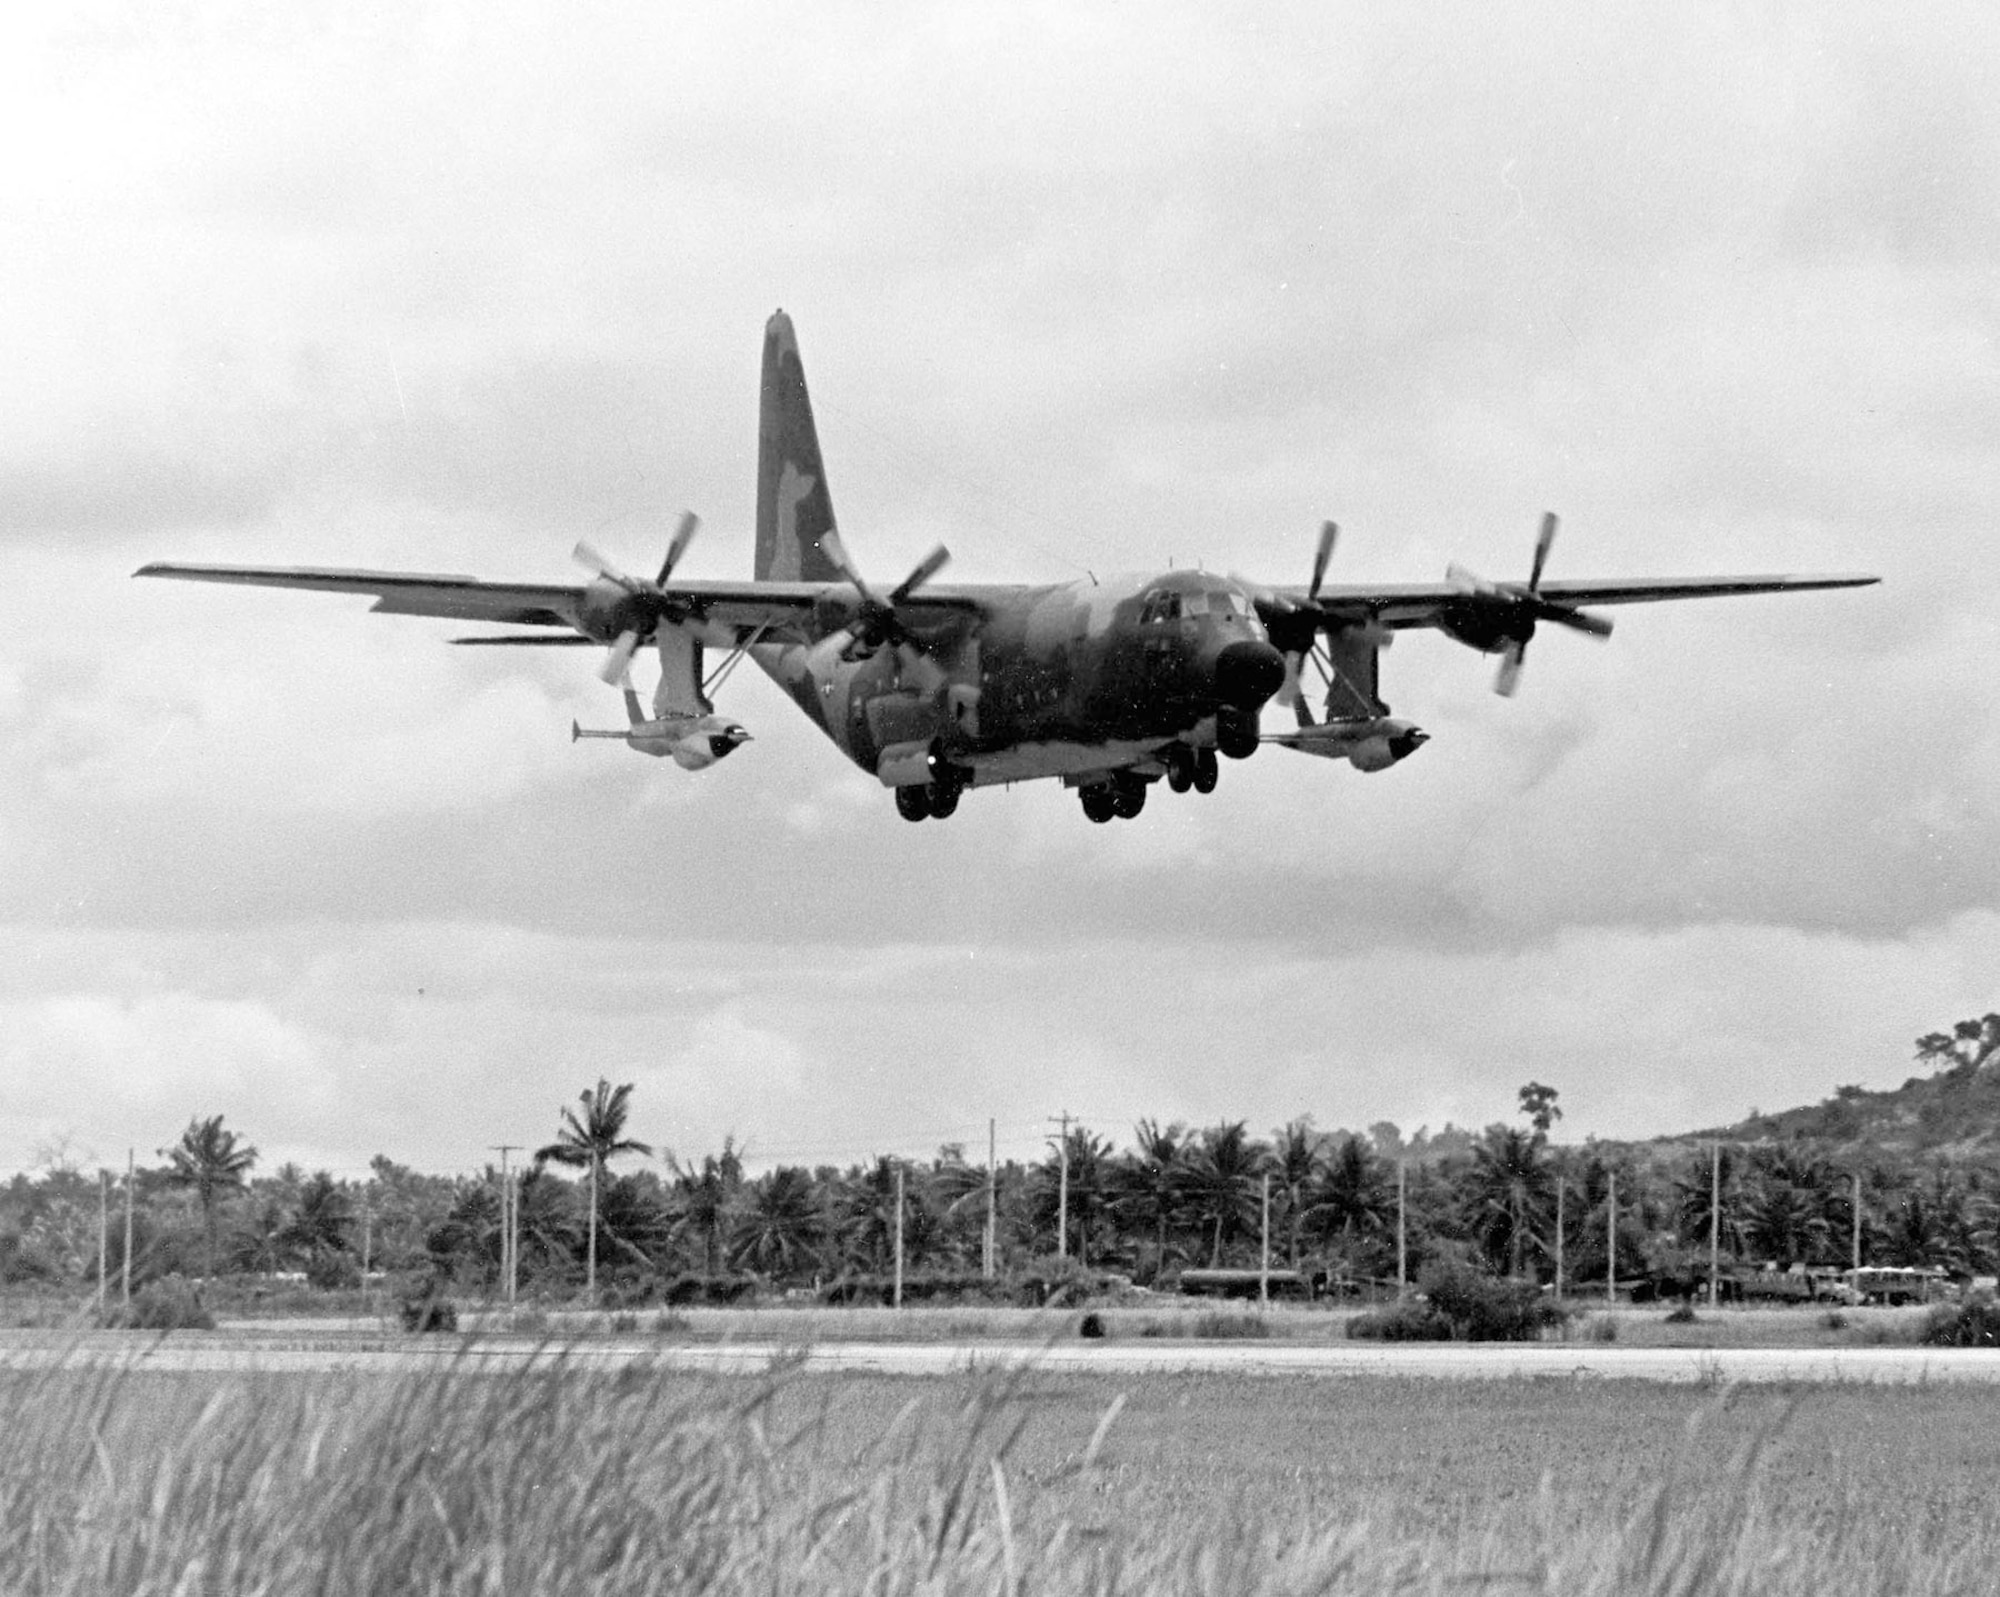 DC-130 taking off on a mission in Southeast Asia, carrying two AQM-34s. Firebees flew using a pre-programmed guidance system or by remote control from the DC-130 crew. (U.S. Air Force photo)